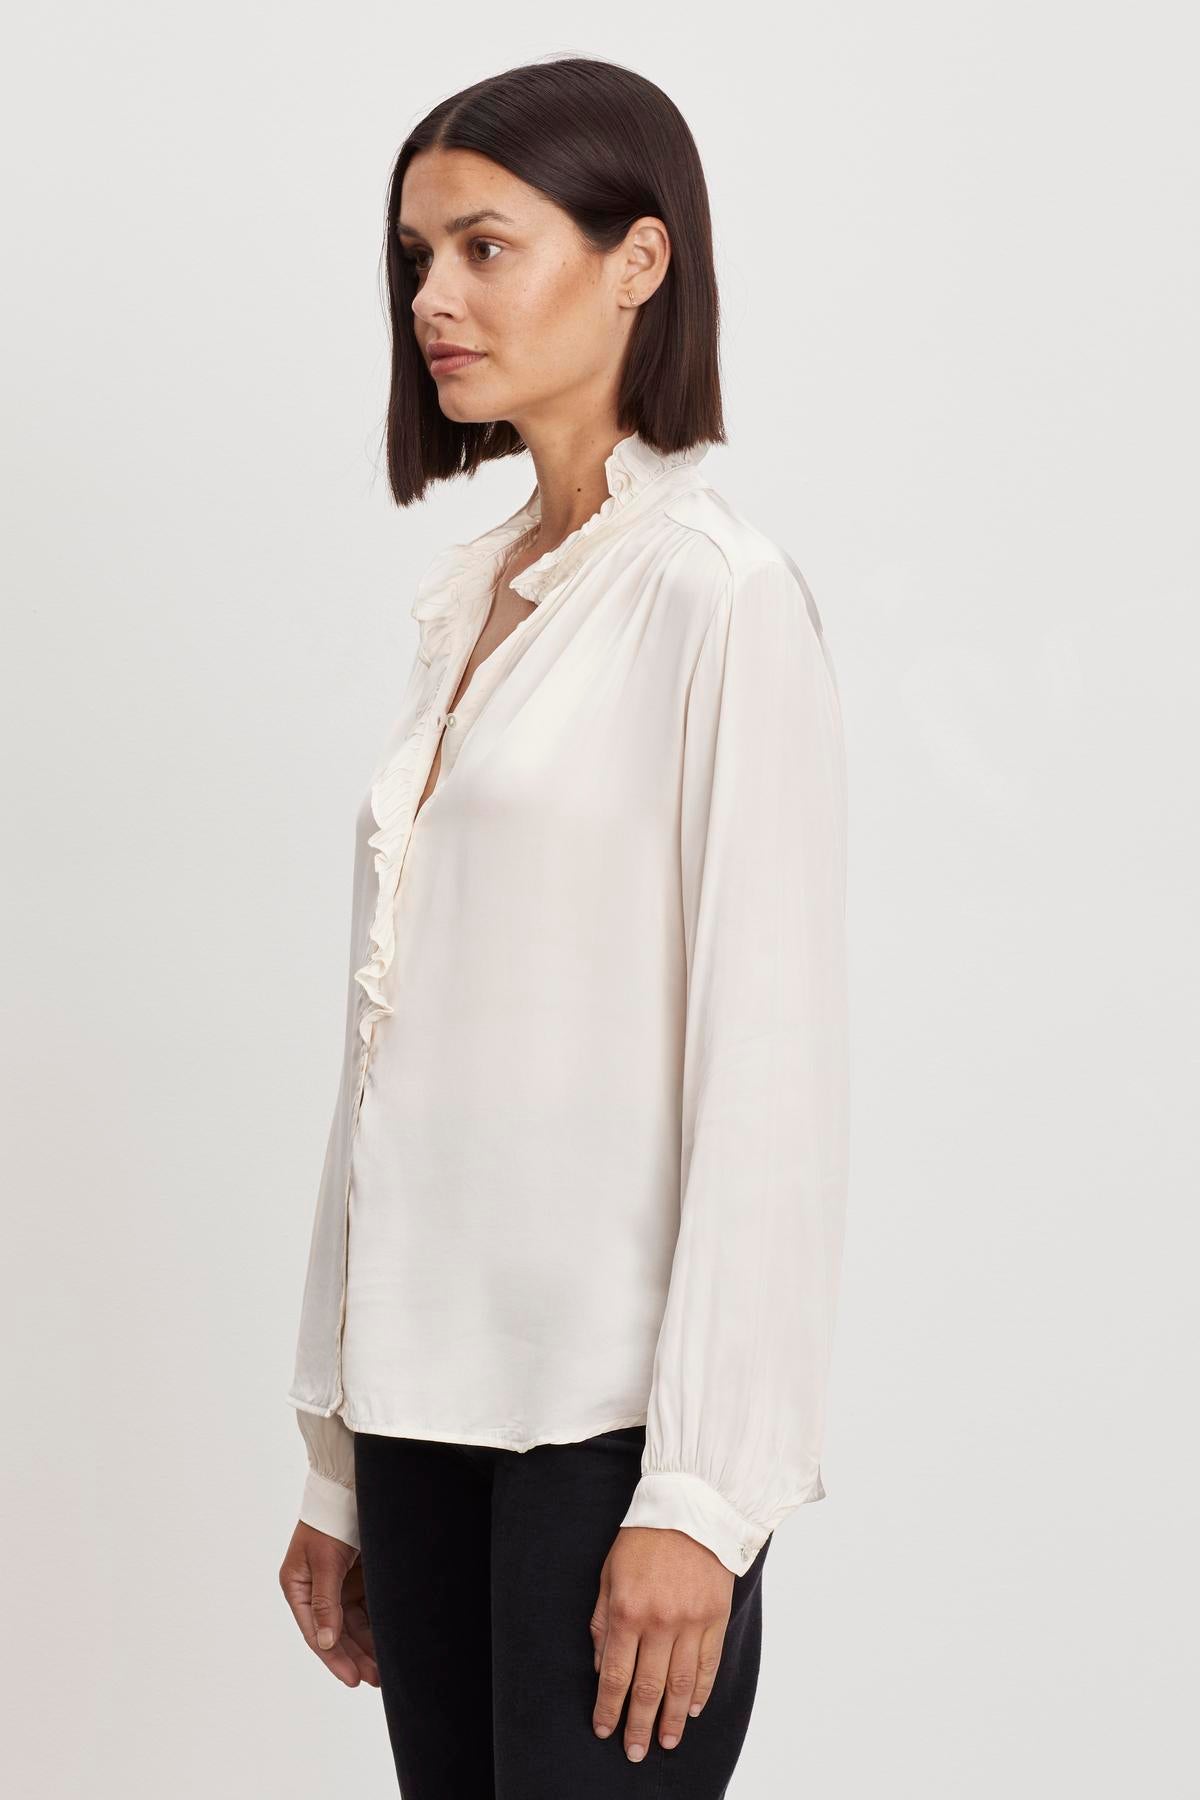   The model is wearing a Velvet by Graham & Spencer ALI BUTTON FRONT BLOUSE with ruffles on the neckline. 